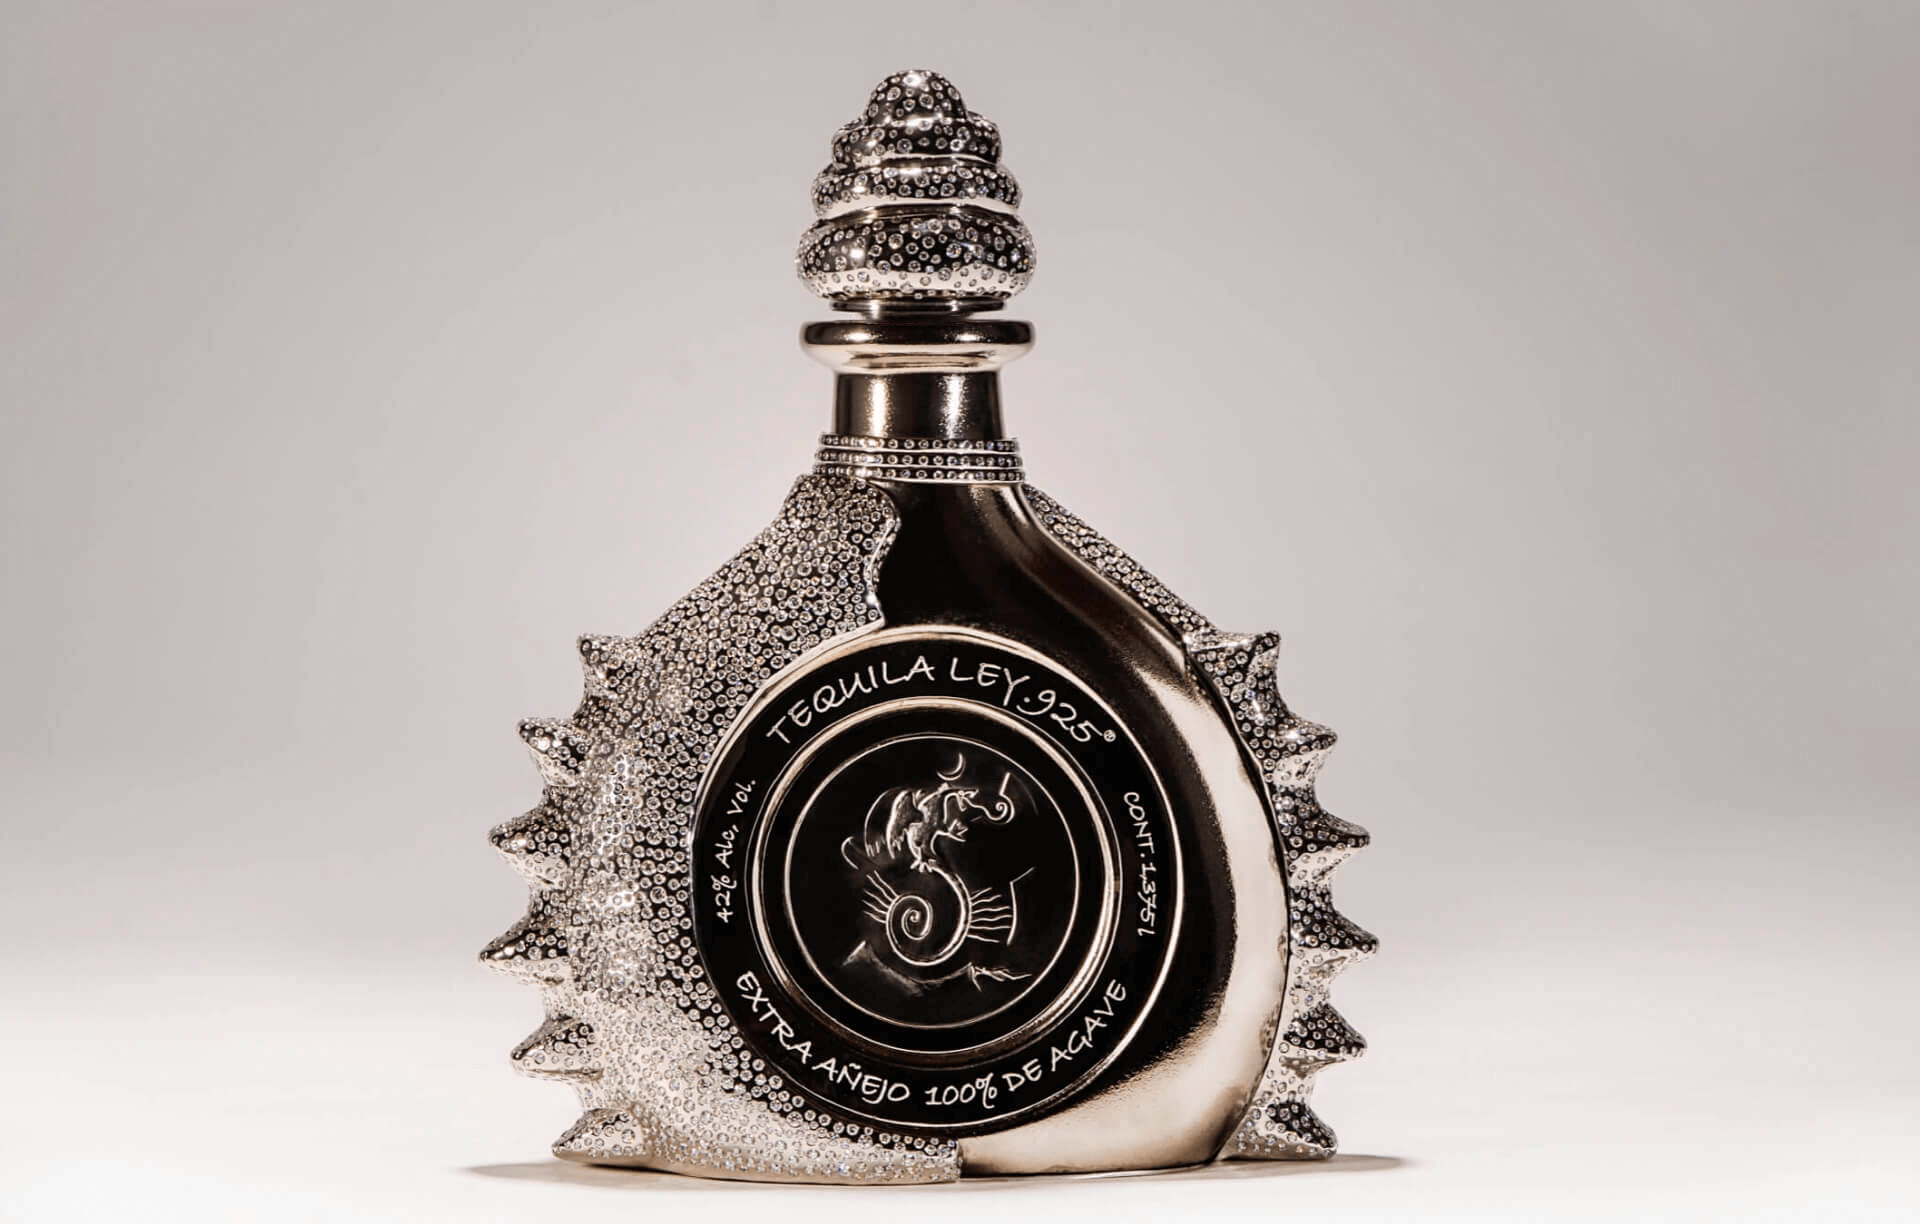 Ley 925 Diamante, the most expensive Tequila in the World according to Guinness Book World Records.